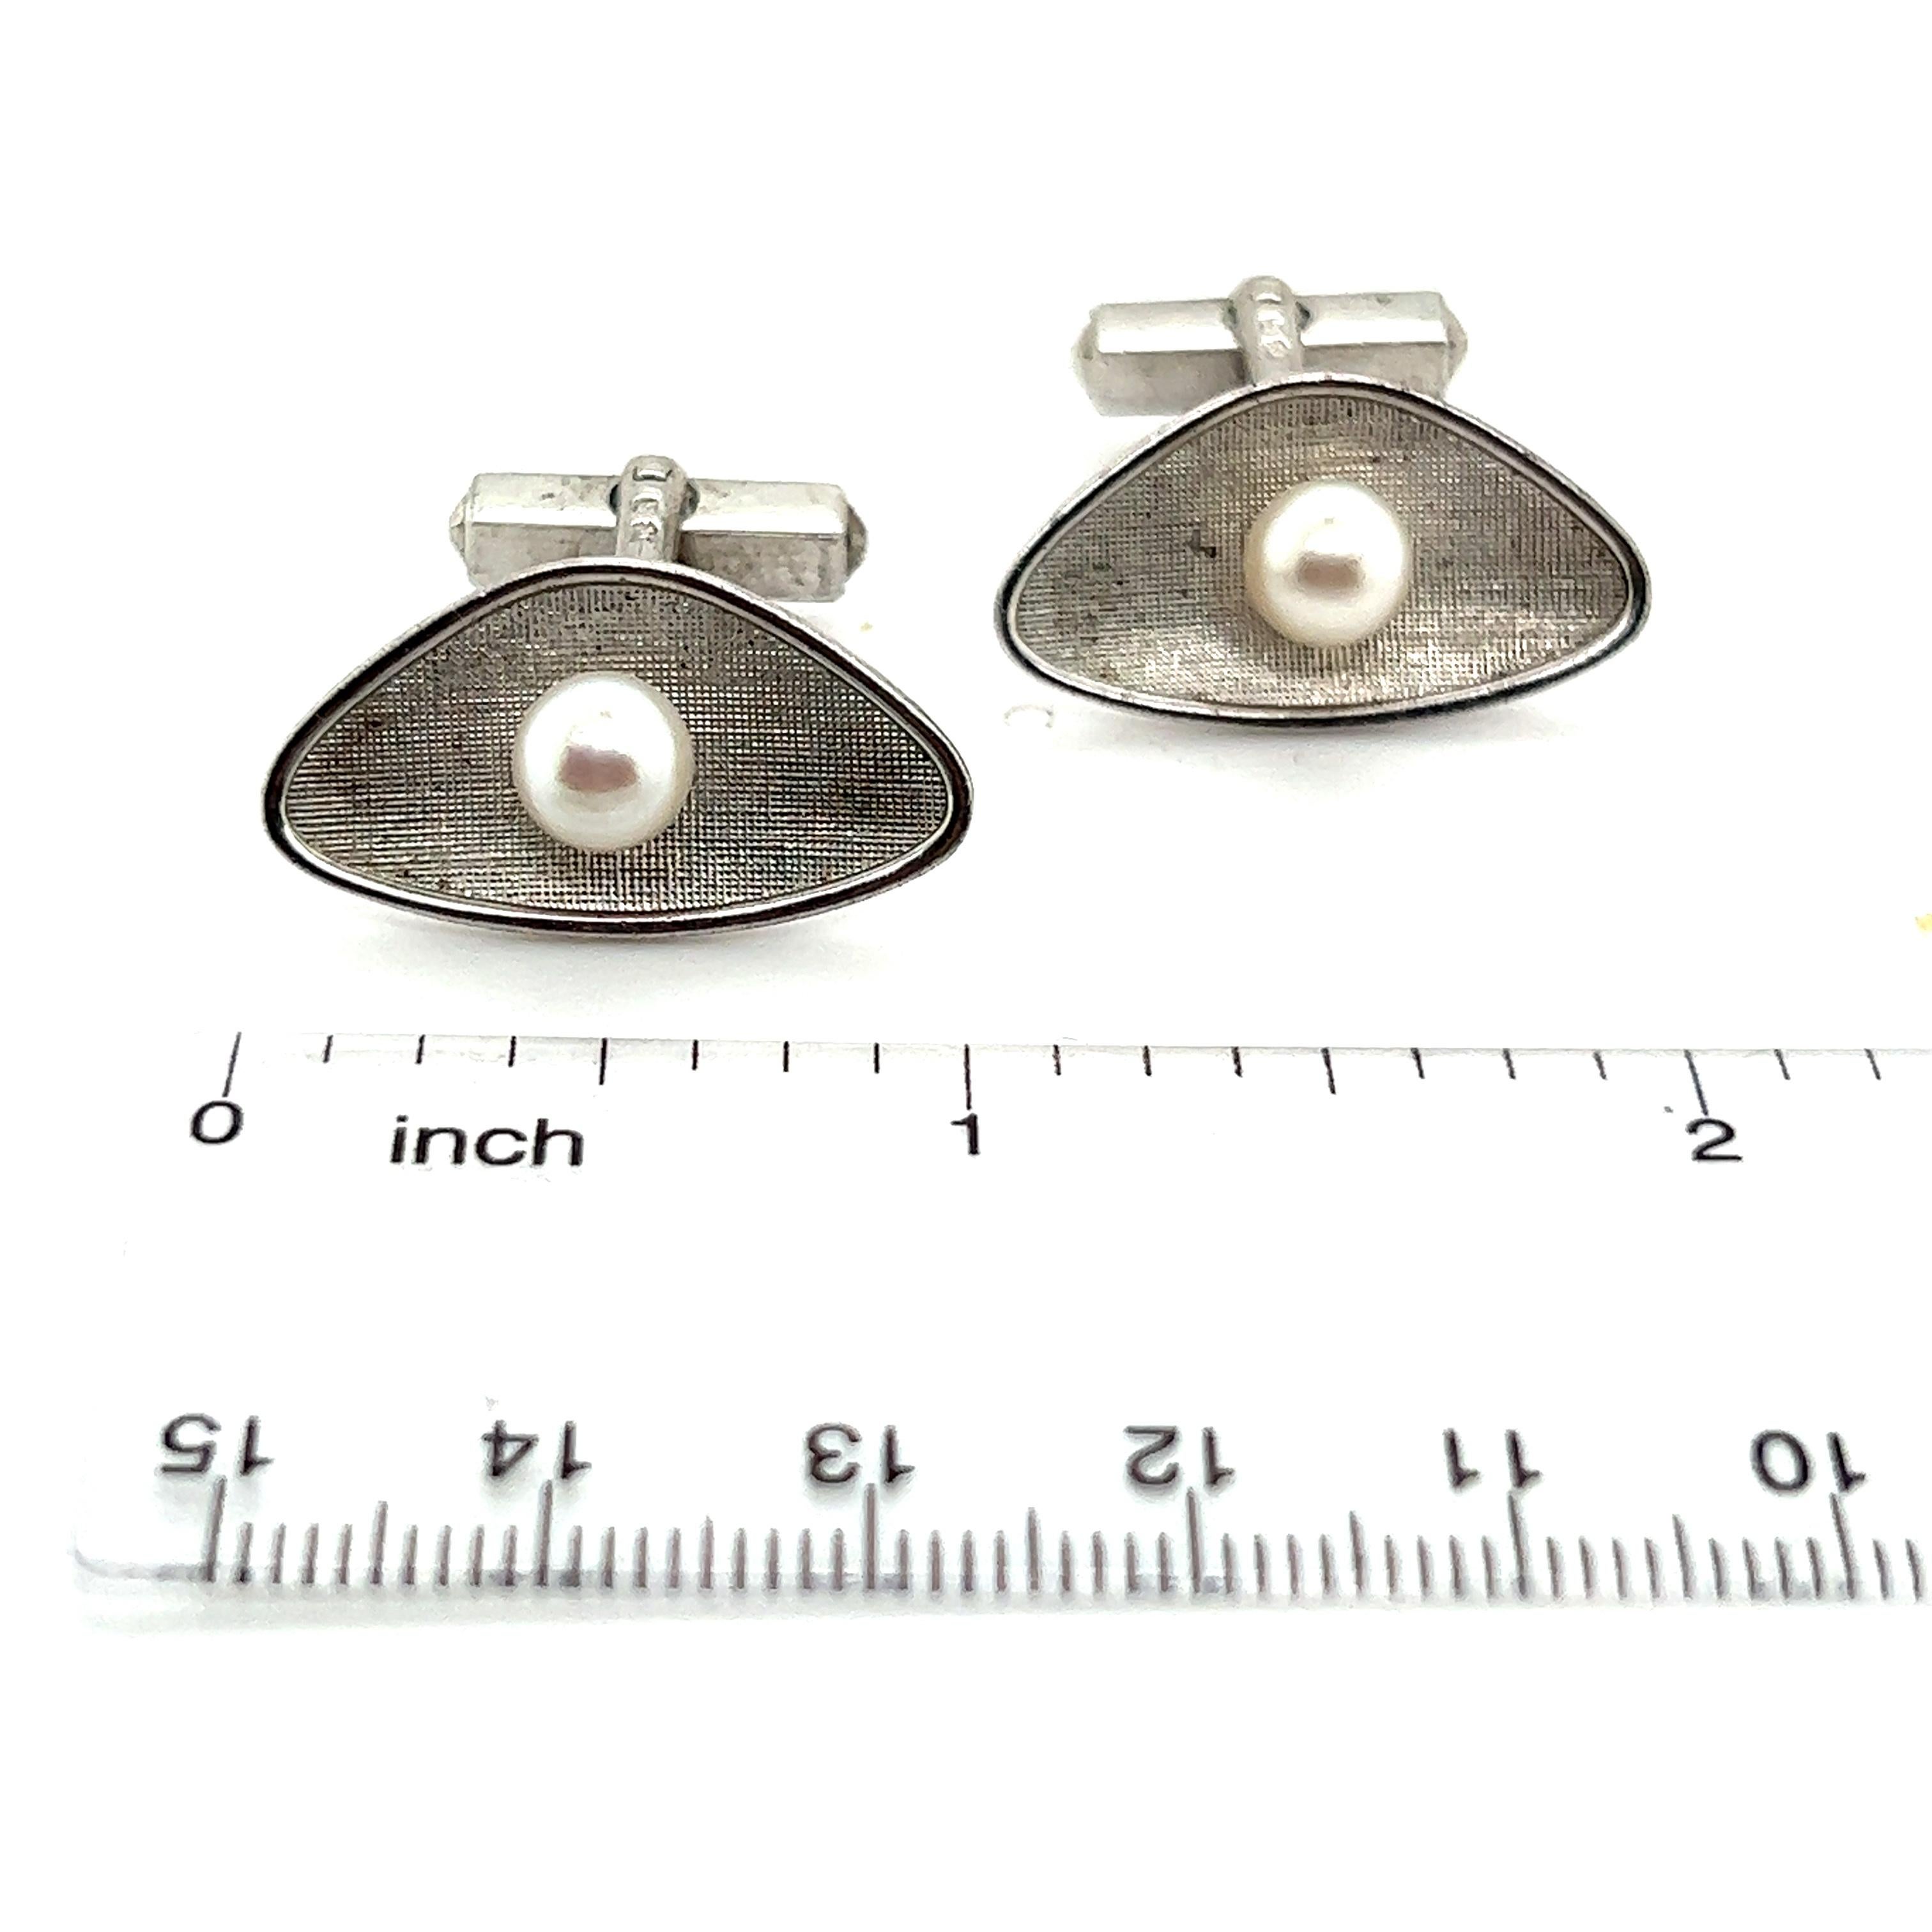 Mikimoto Estate Akoya Pearl Mens Cufflinks 6.5 mm Sterling Silver M311

These elegant Authentic Mikimoto Estate Akoya pearl cufflinks are made of sterling silver and have 2 Akoya Cultured Pearls.

TRUSTED SELLER SINCE 2002

PLEASE SEE OUR HUNDREDS